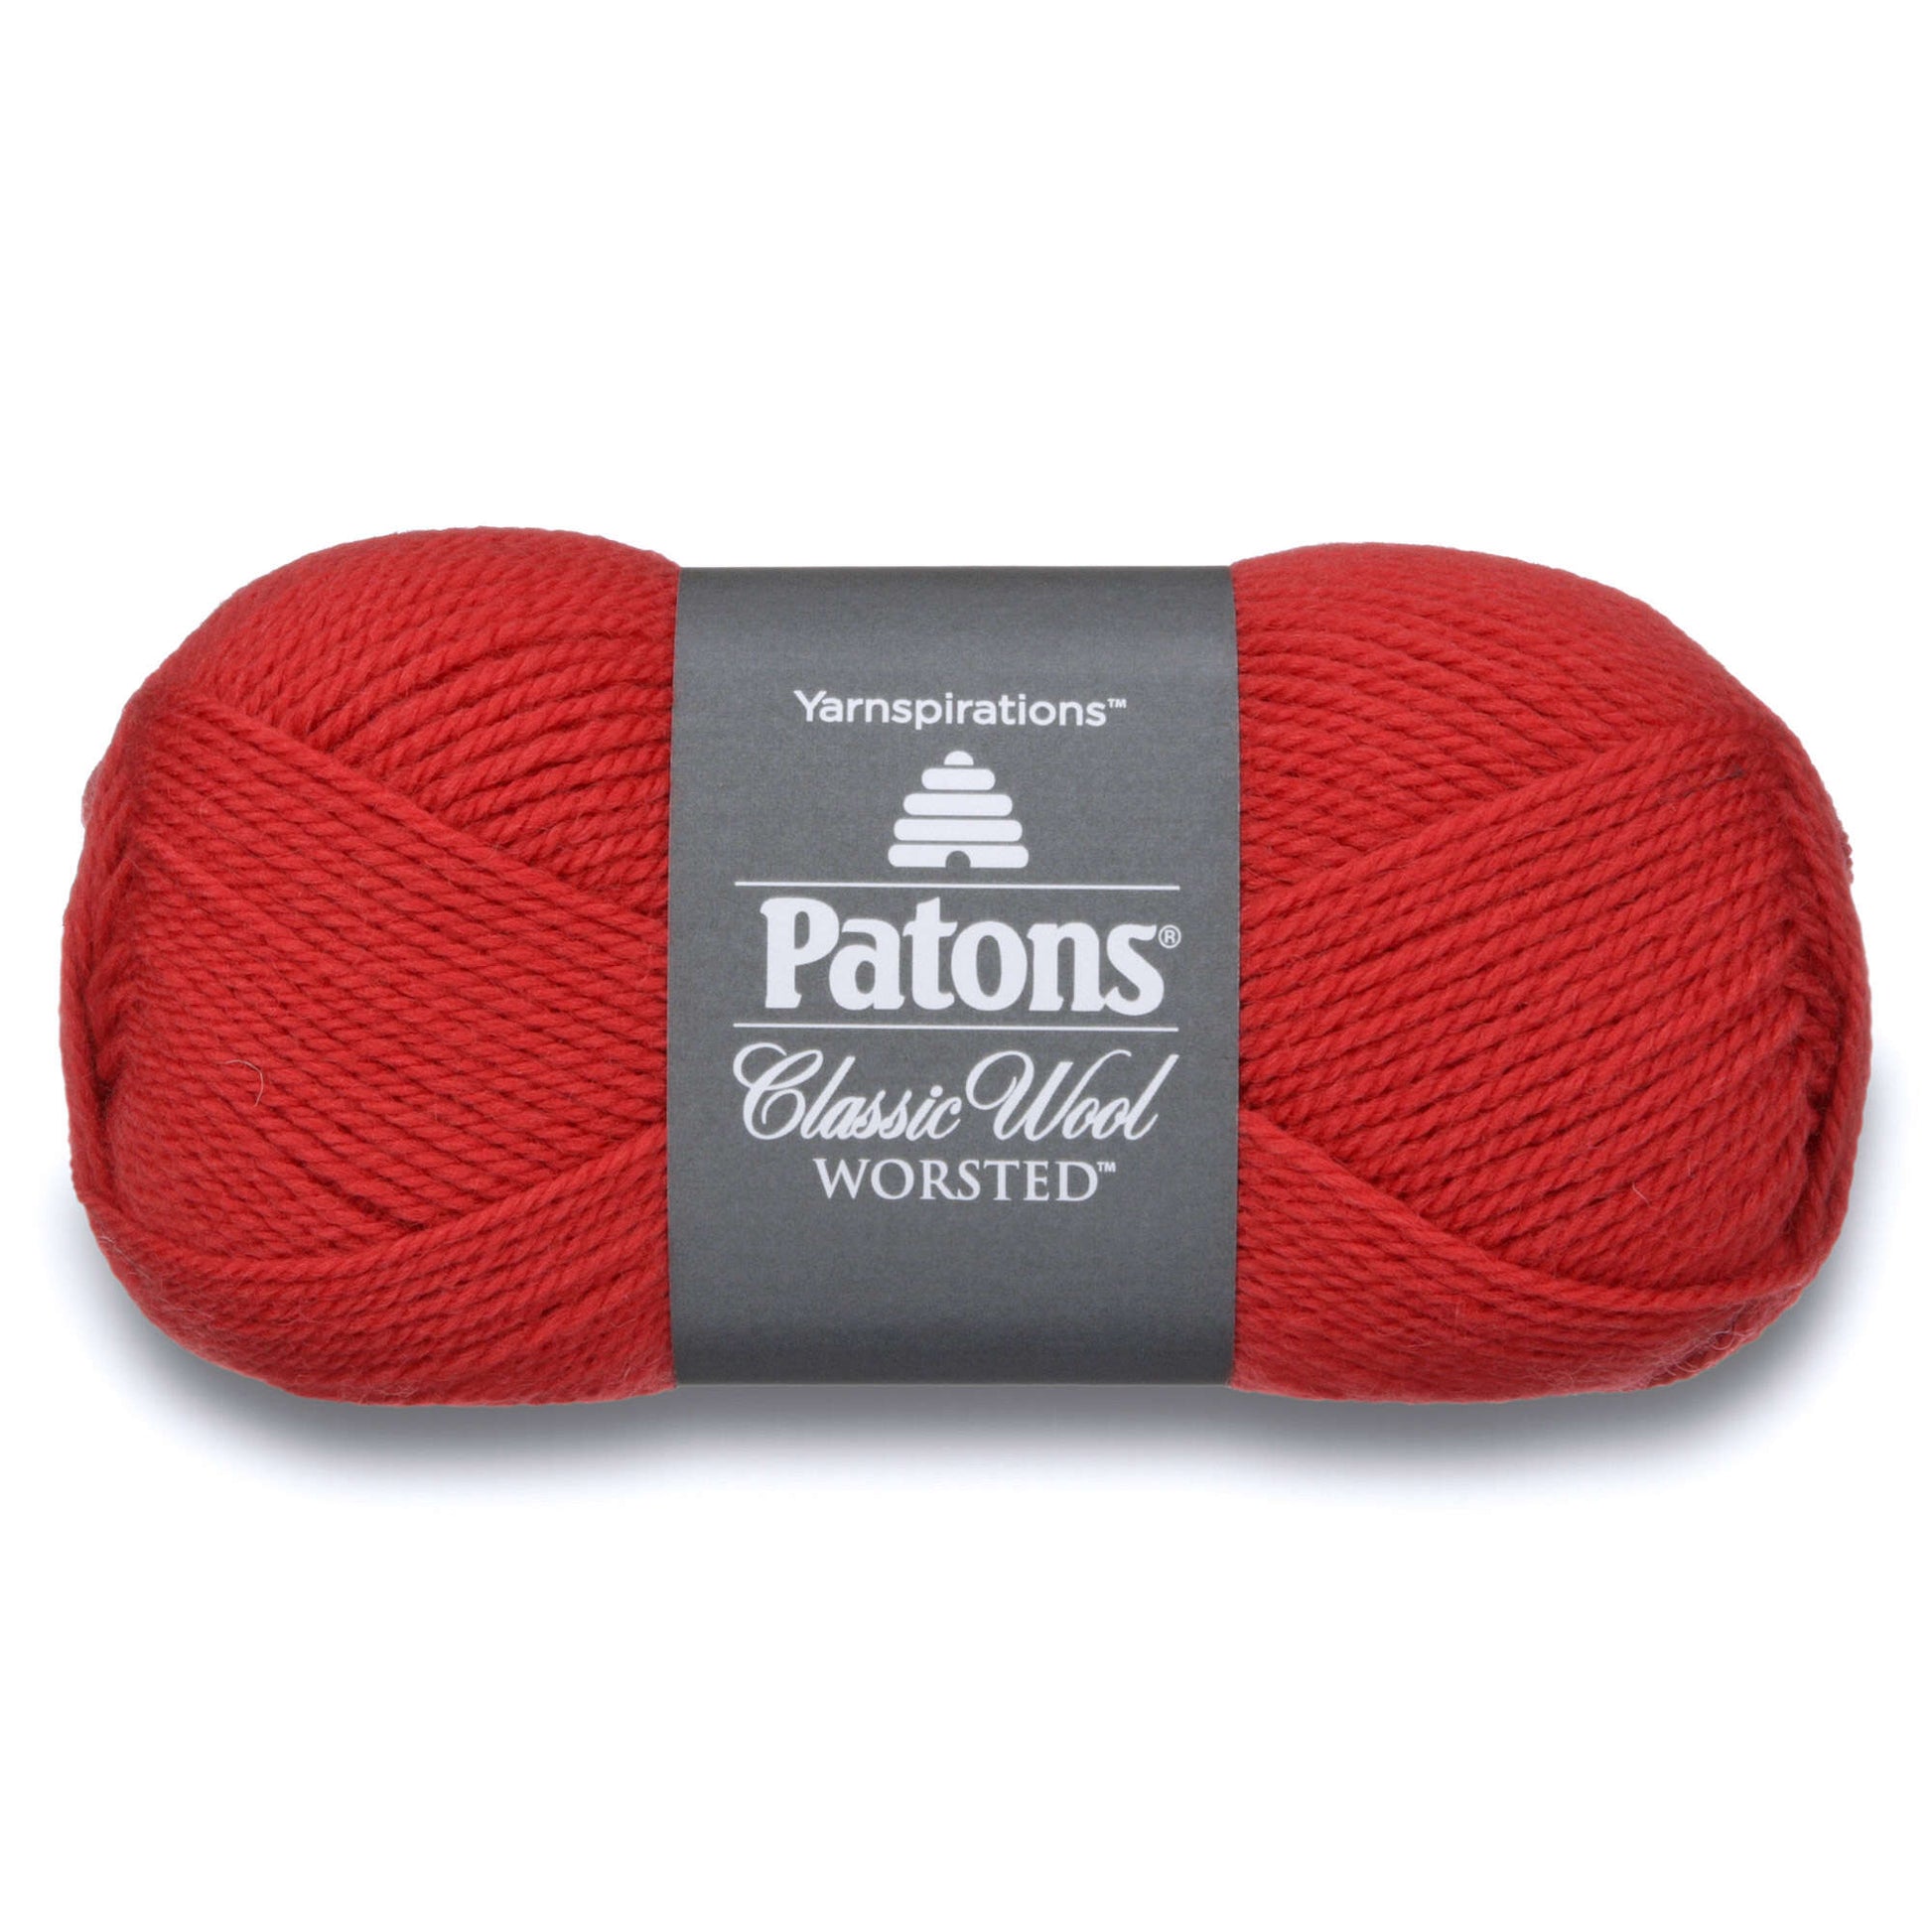 Patons Classic Wool Worsted Yarn - Discontinued Shades Currant